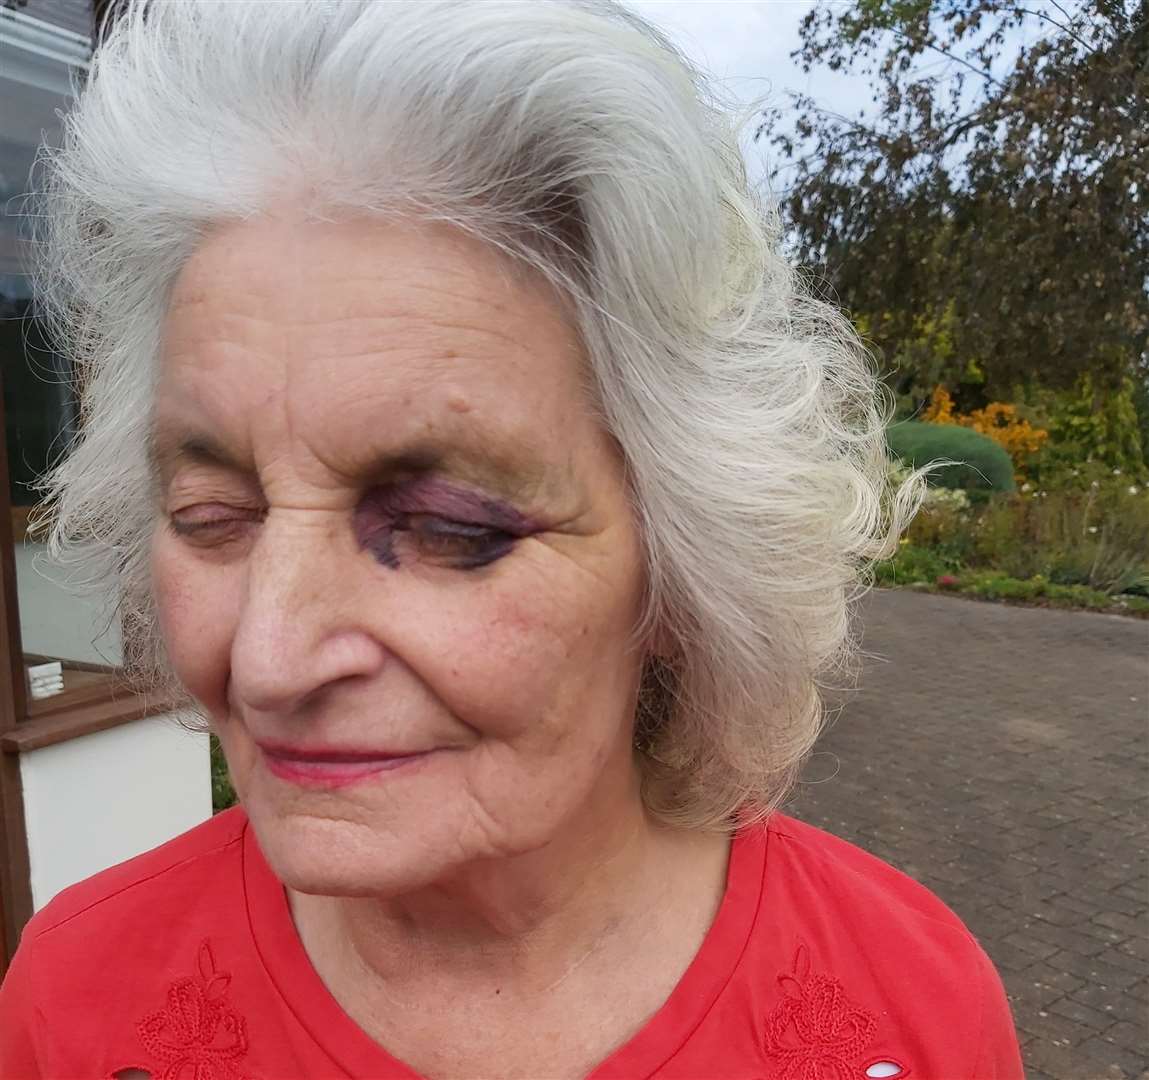 The bruise on Joan Stone's face where was she struck with a gun during a burglary